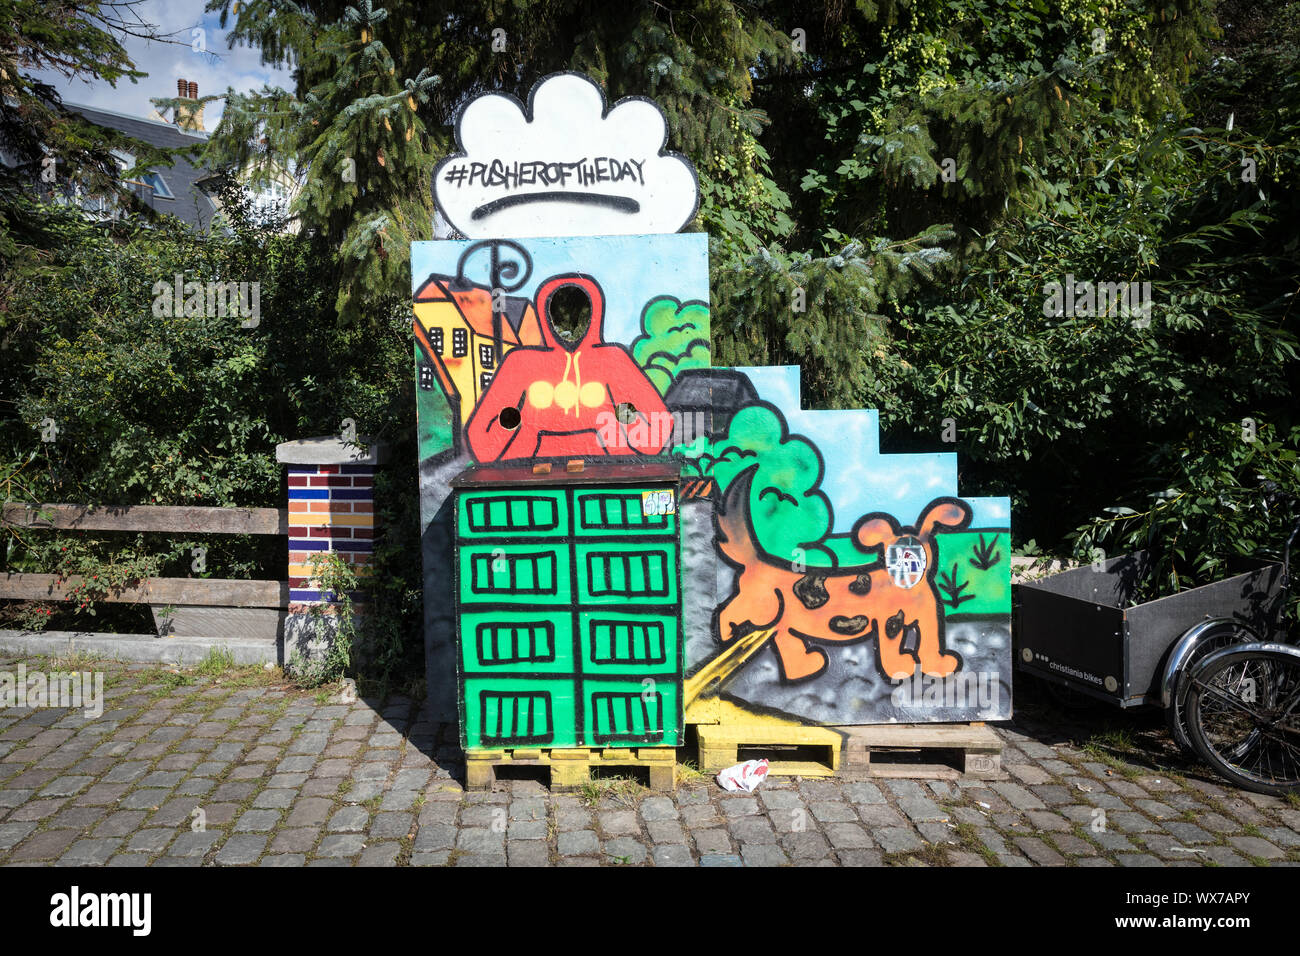 A 'pusher of the day' photo stand in Freetown Christiania, Christianshavn, Copenhagen Stock Photo